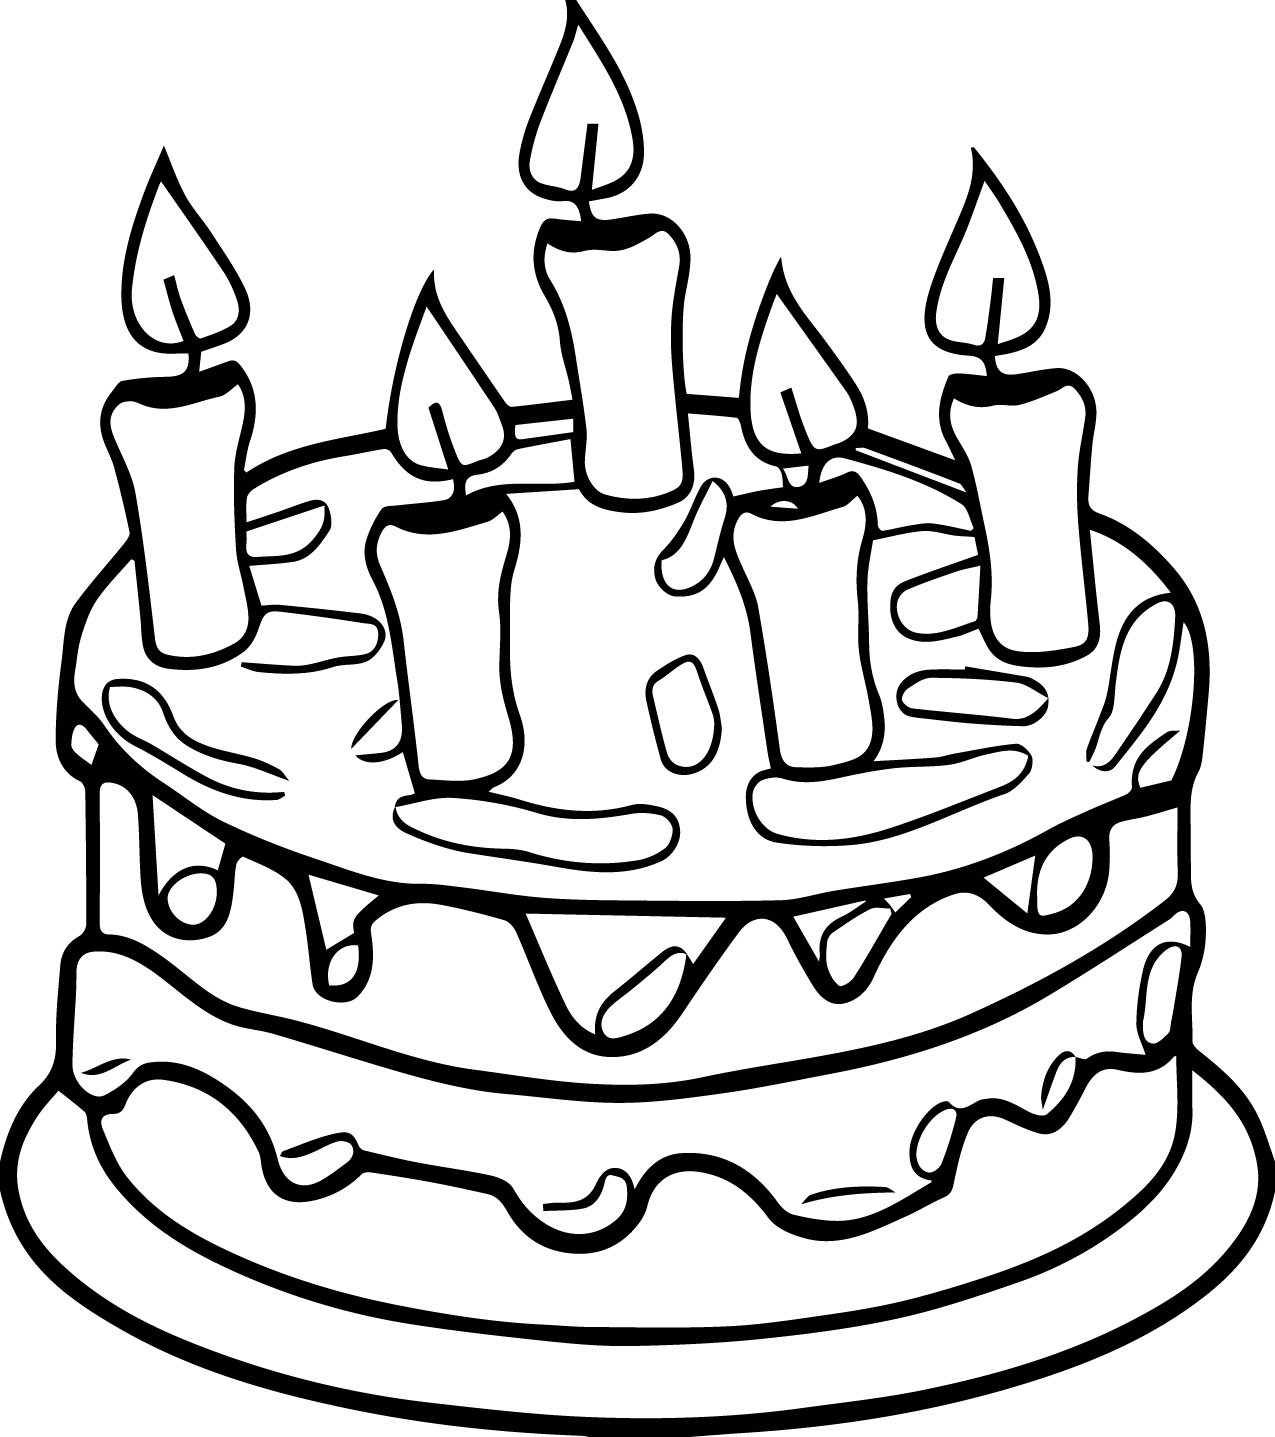 birthday-cake-colouring-pages-clipart-best